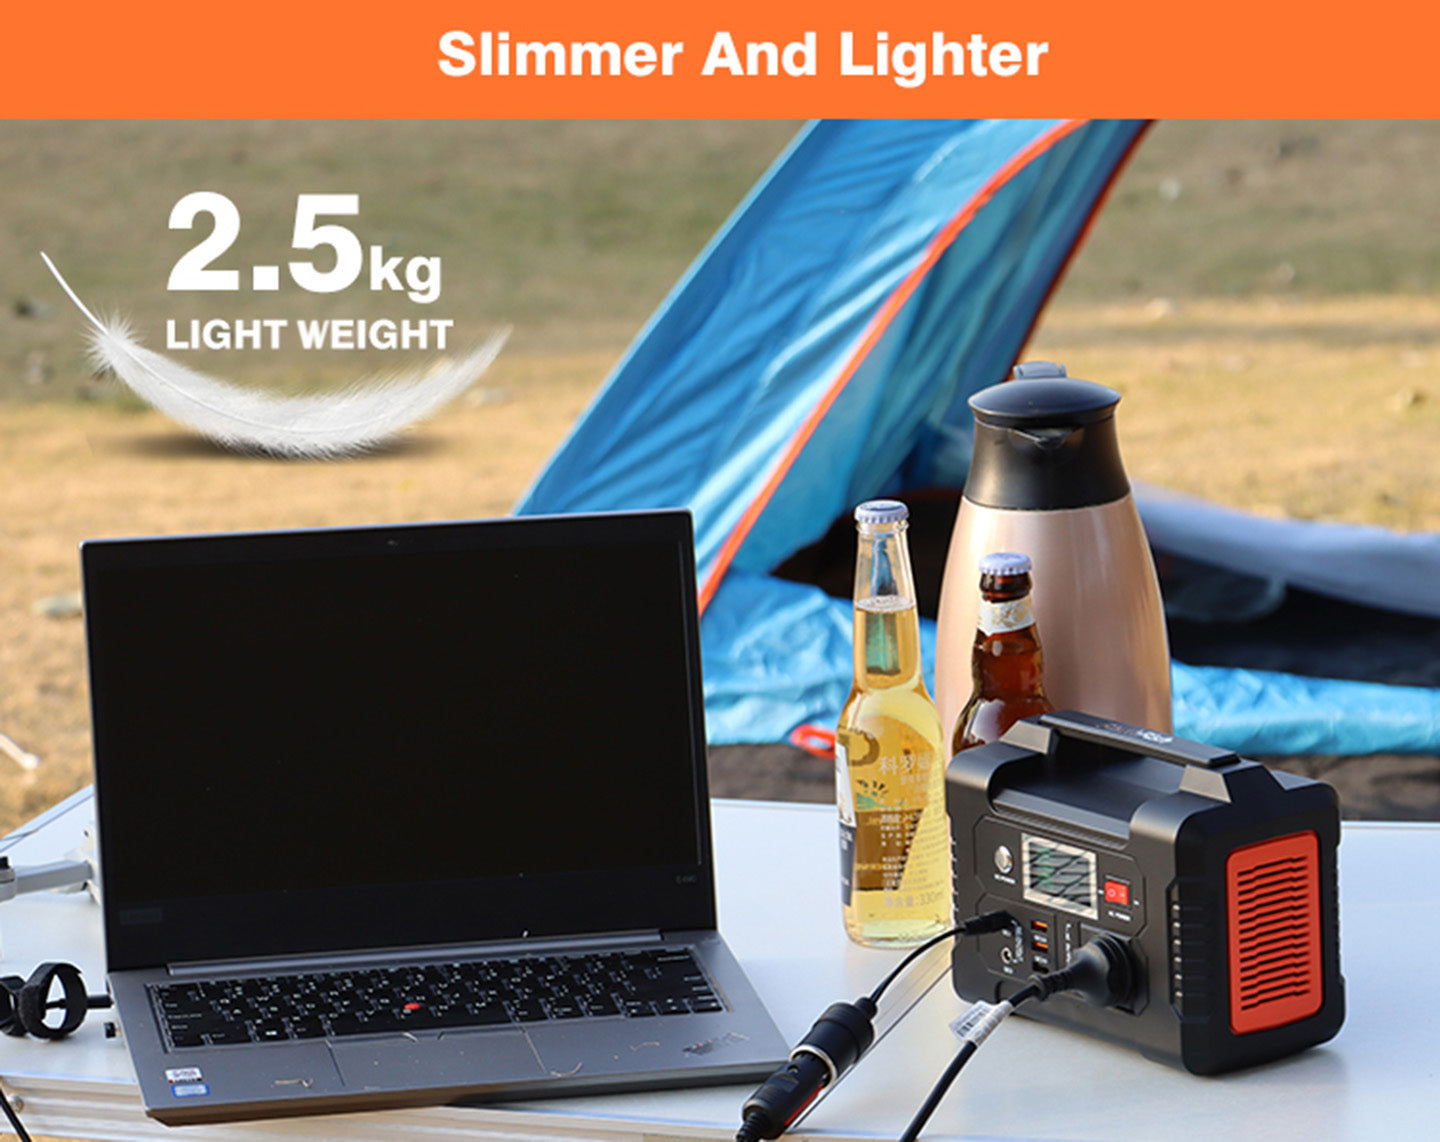 portable power station, Flashfish e200, outdoor power supply, emergency power, battery backup, renewable energy, camping gear, off-grid living, power station review, eco-friendly gadgets, travel essentials, portable charger, adventure gear, sustainable living, tech review, power bank, slimmer and lighter power station, 2.5kg